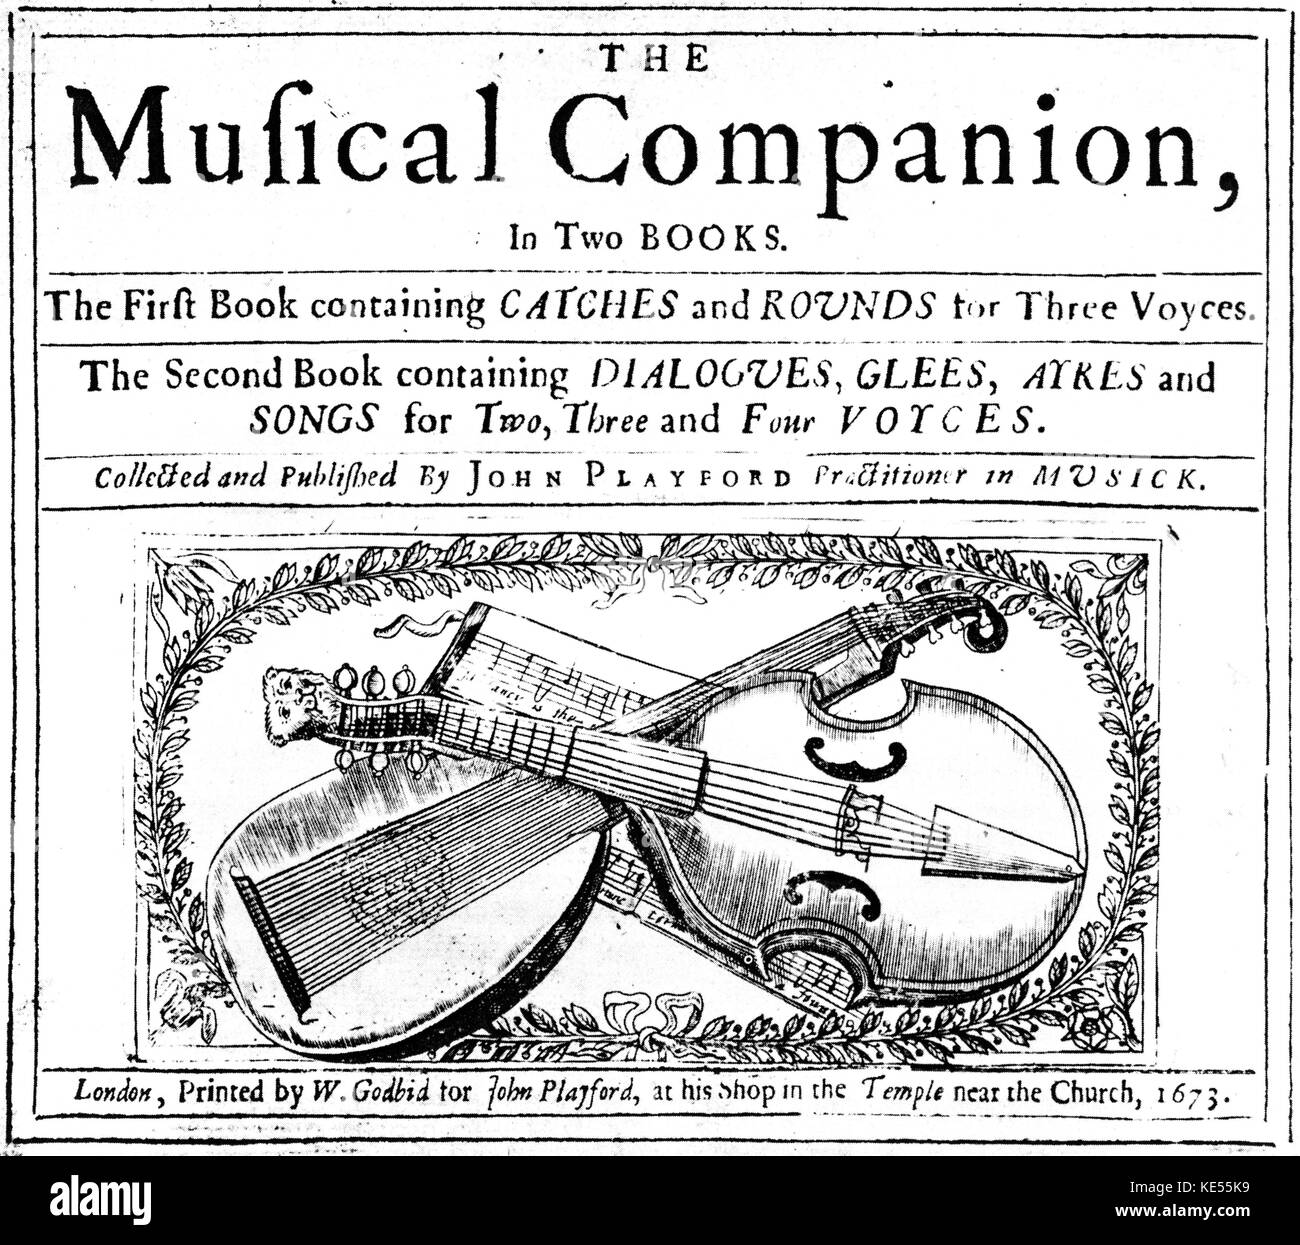 'The Musical Companion' - title page of the first edition .Page reads, ' 'The Musical Companion' in two books. The first book containing Catches and Rounds for three Voyces. The Second Book containin Dialogues, Glees, Ayres and Songs for Two, Three and Four Voyces.'. Printed byW. Godbid, for John Playford, at his Shop in the Temple near the Church, 1673.'. JP: English publisher,  1623 - 1686. Stock Photo